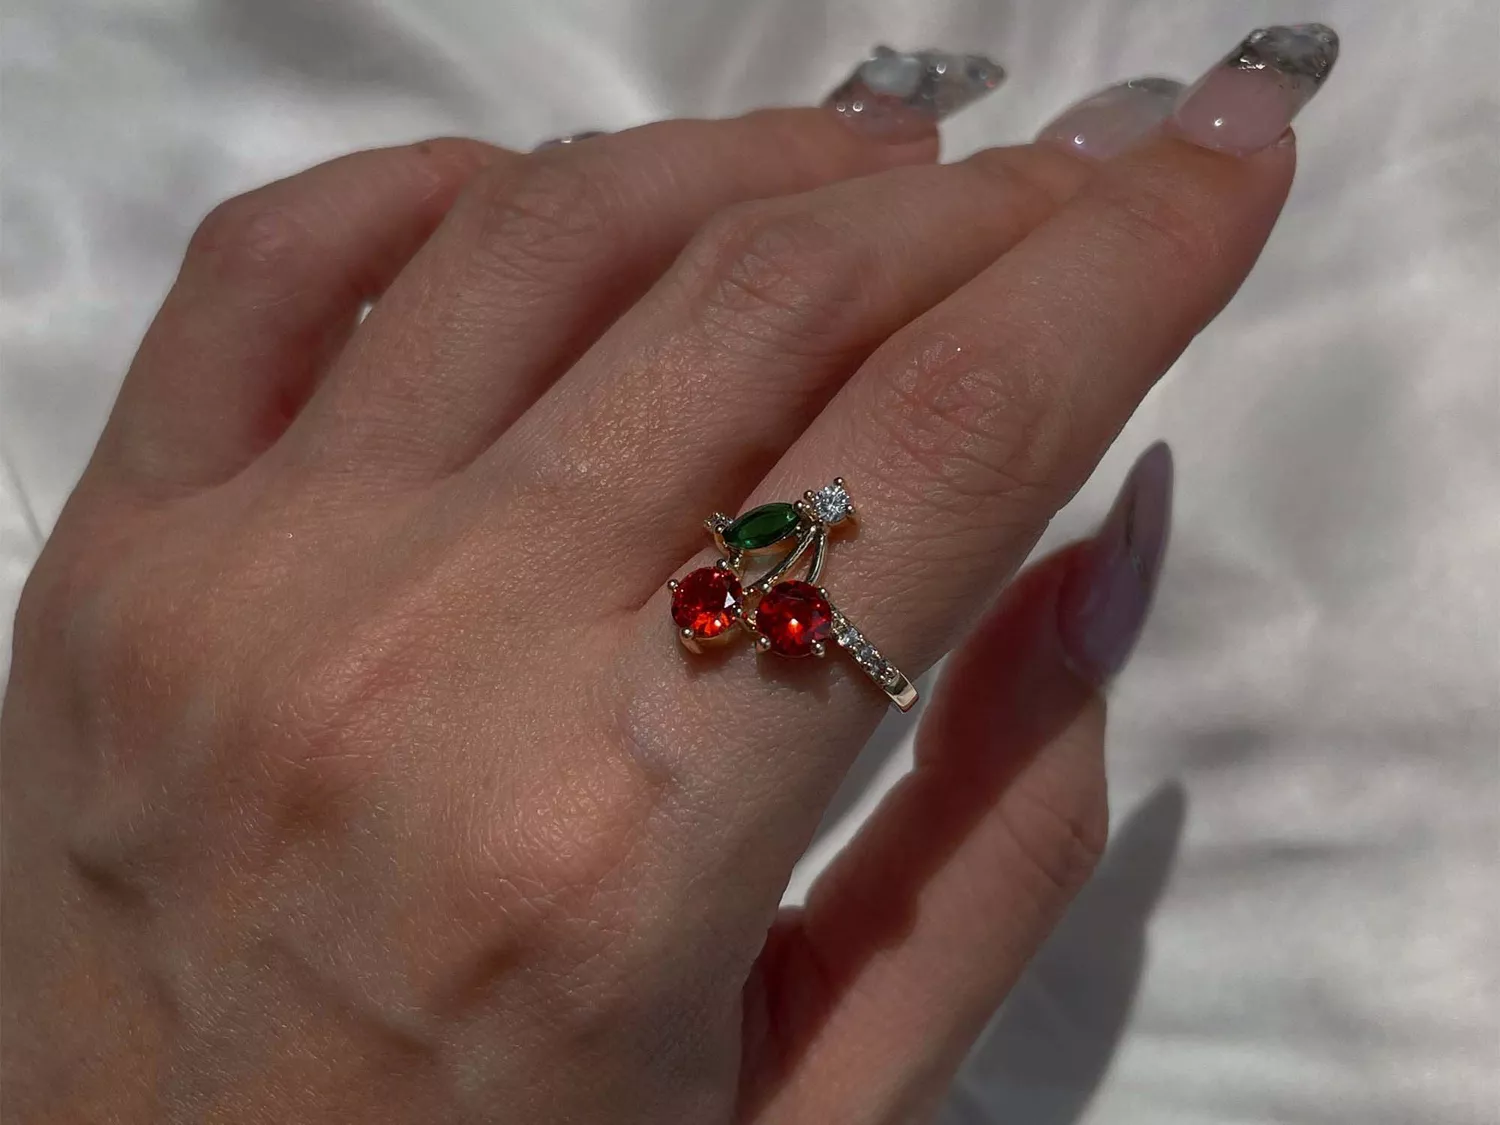 Woman wearing a cherry ring